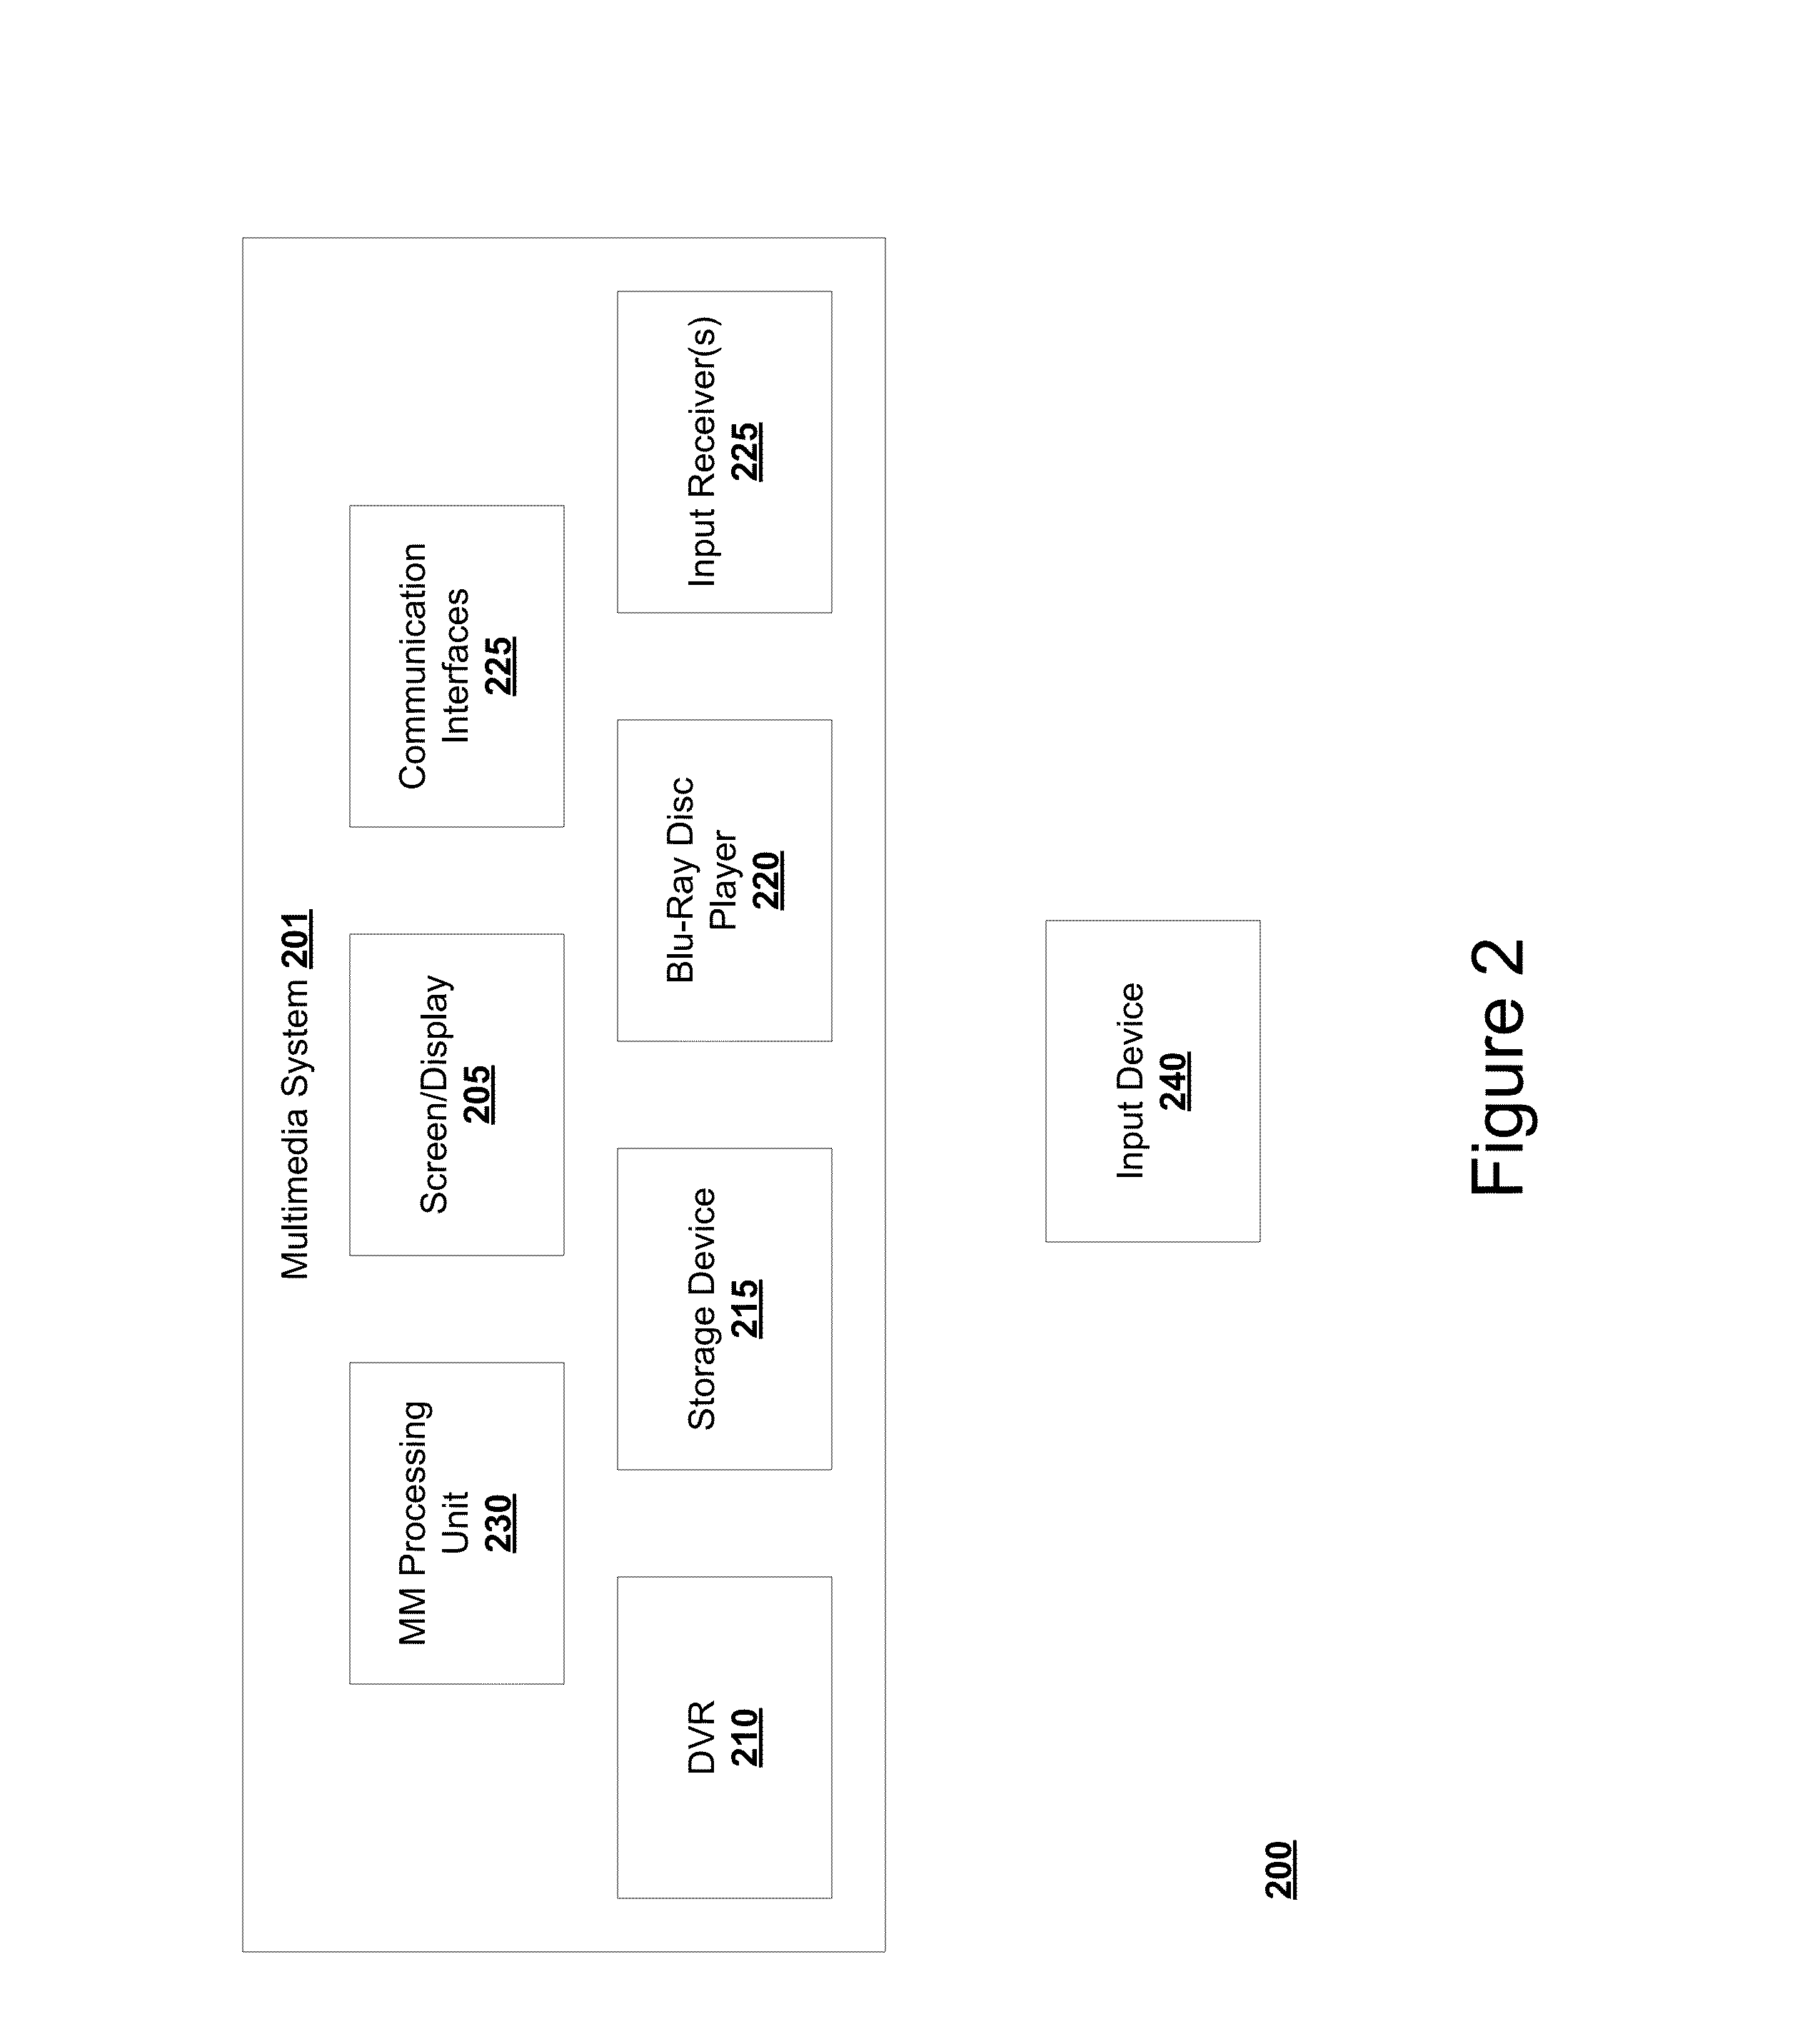 Systems, devices, and methods for integrated searching and retrieving internet or digital content across a communication network for a multimedia platform